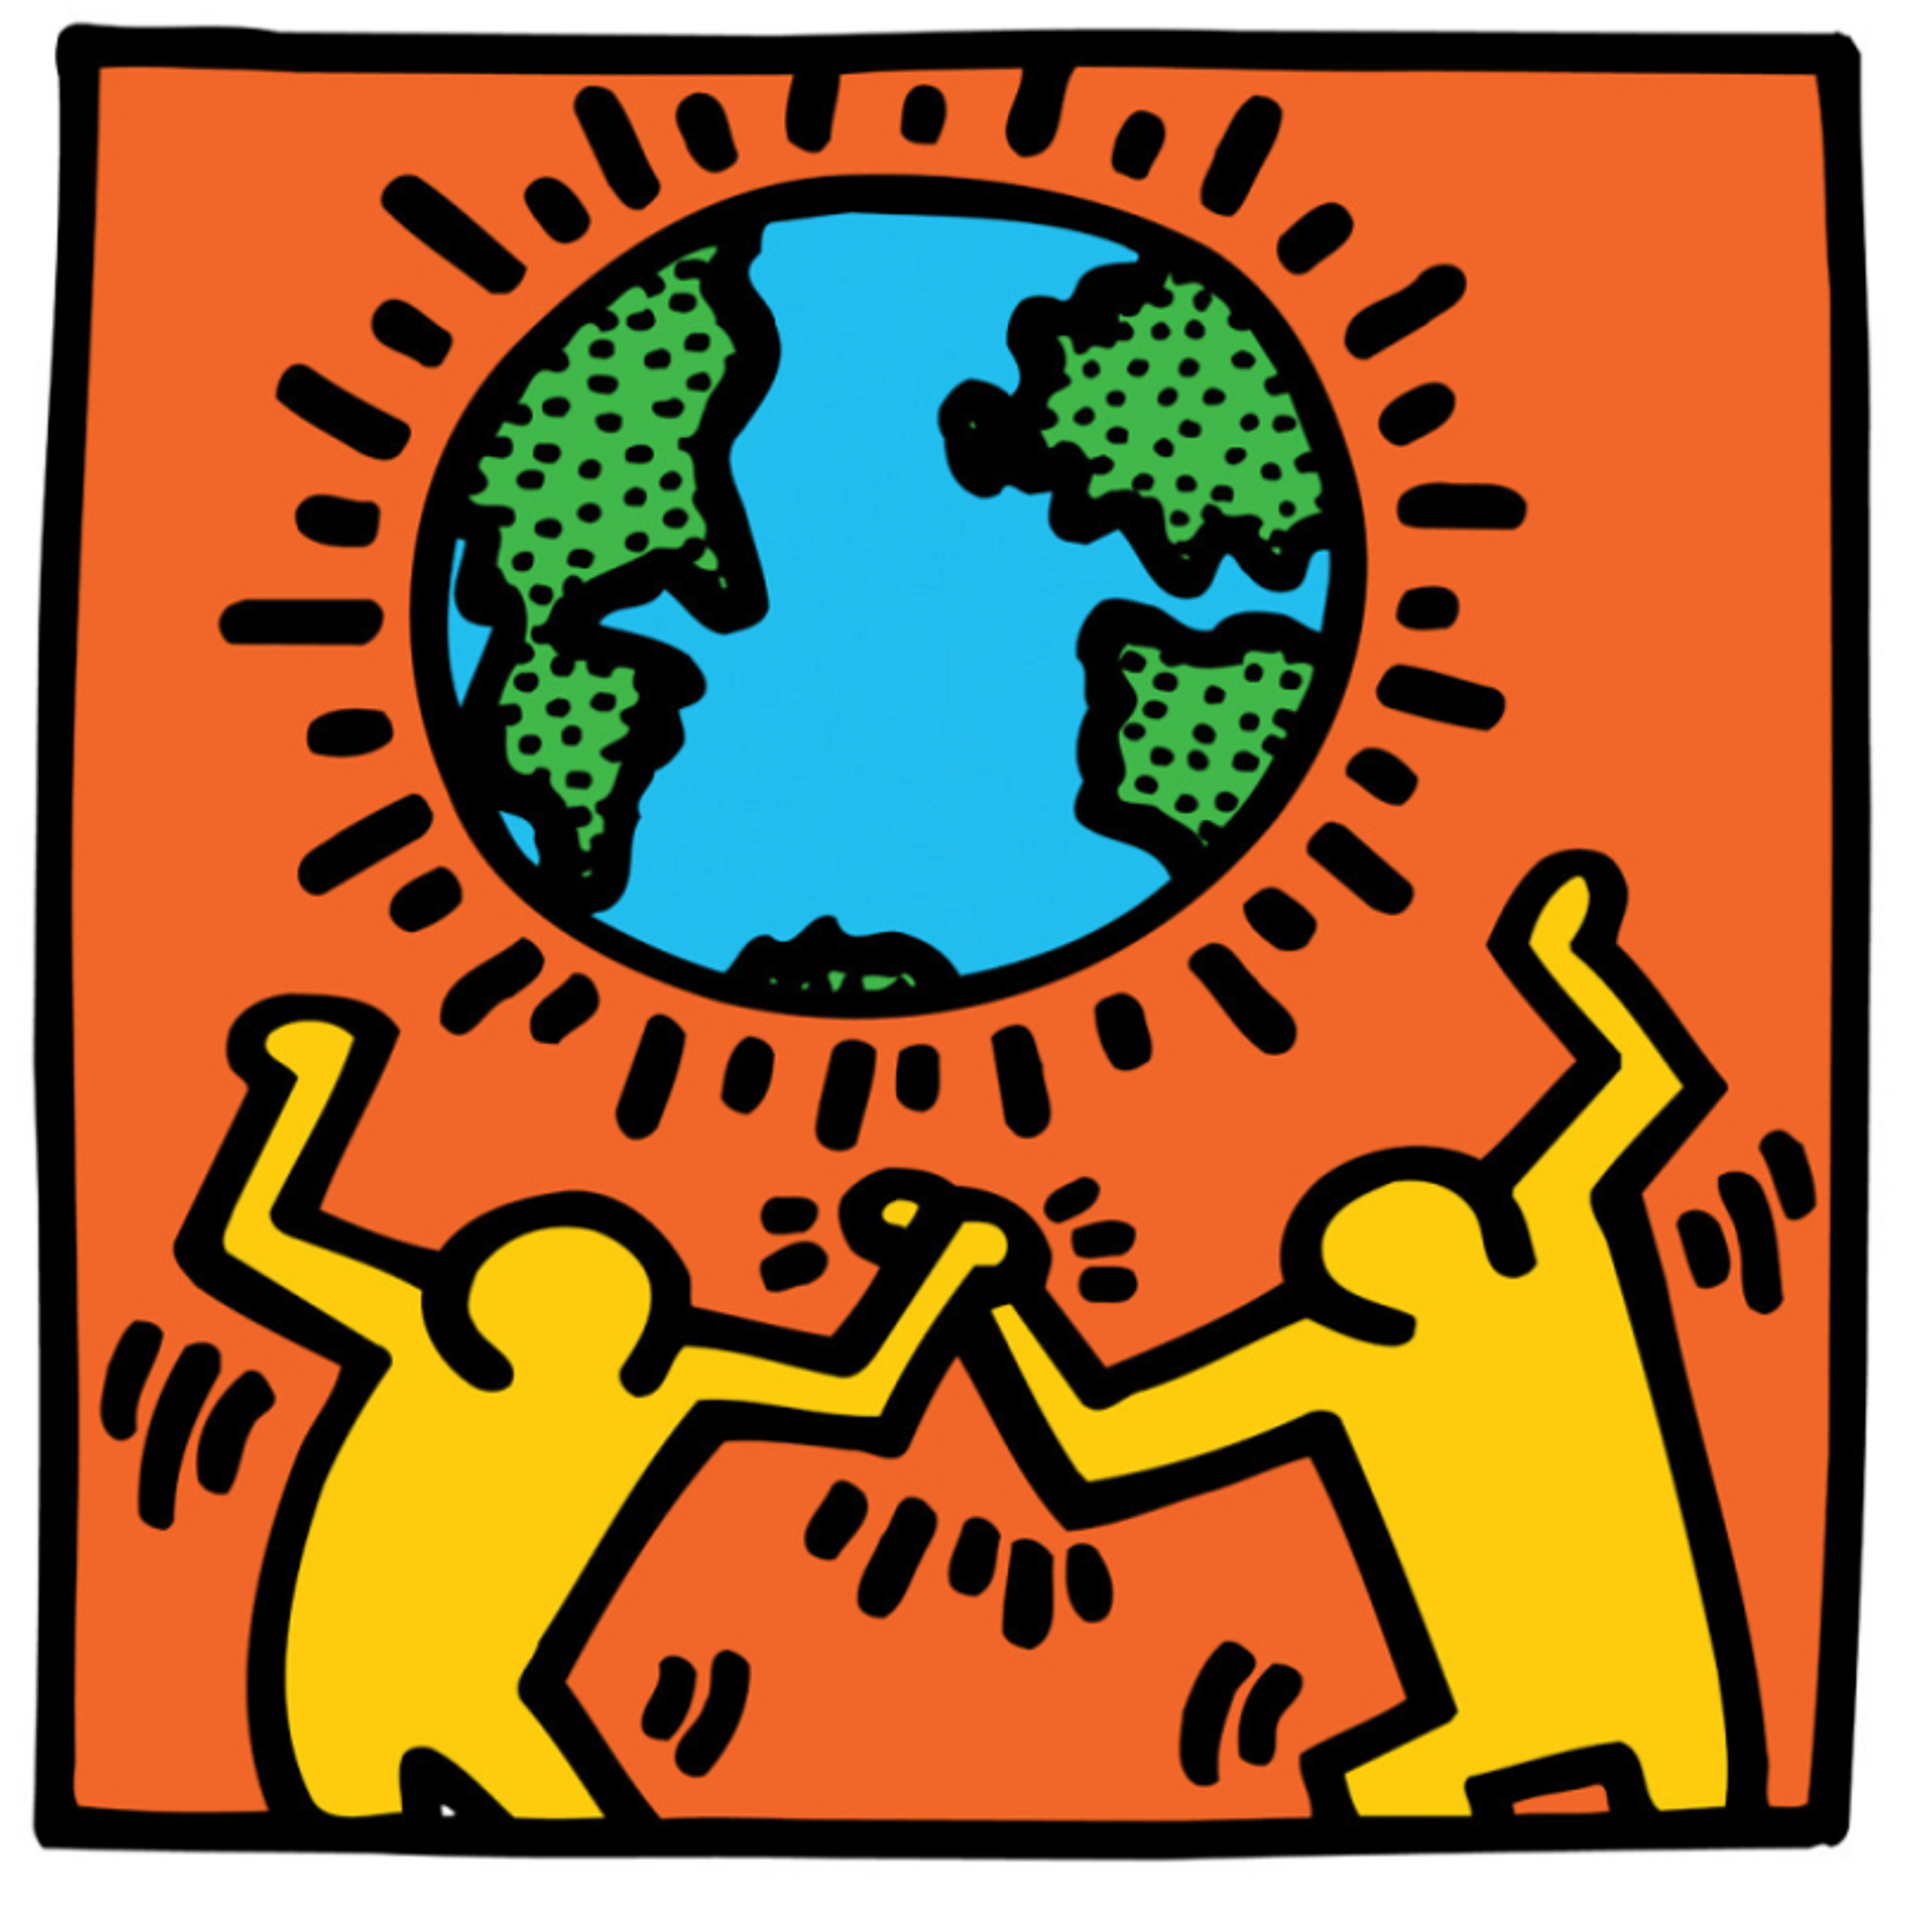 Untitled (world) by Keith Haring